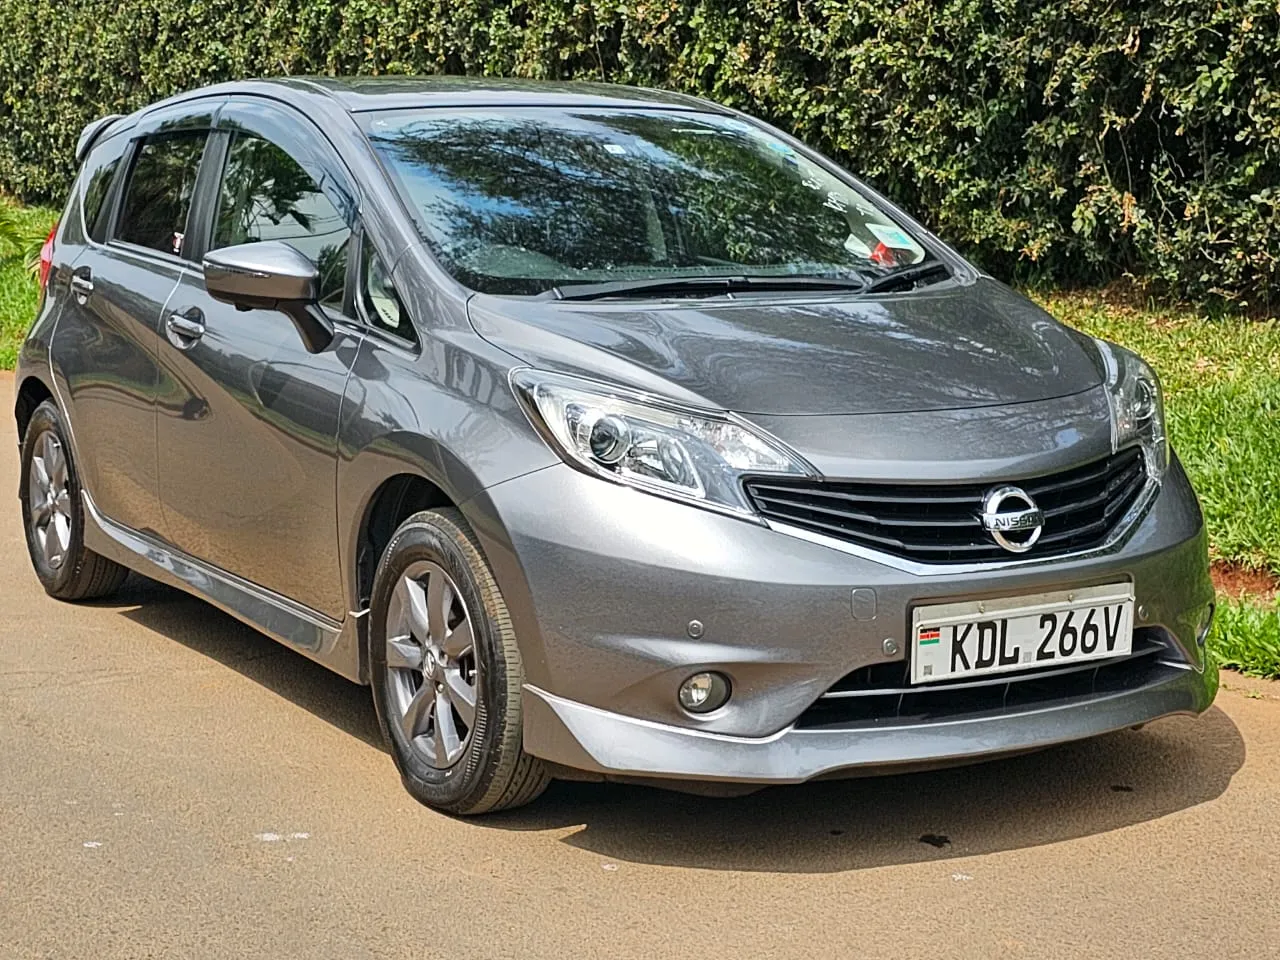 Nissan Note just arrived QUICK SALE You ONLY Pay 20% Deposit Trade in Ok Wow!